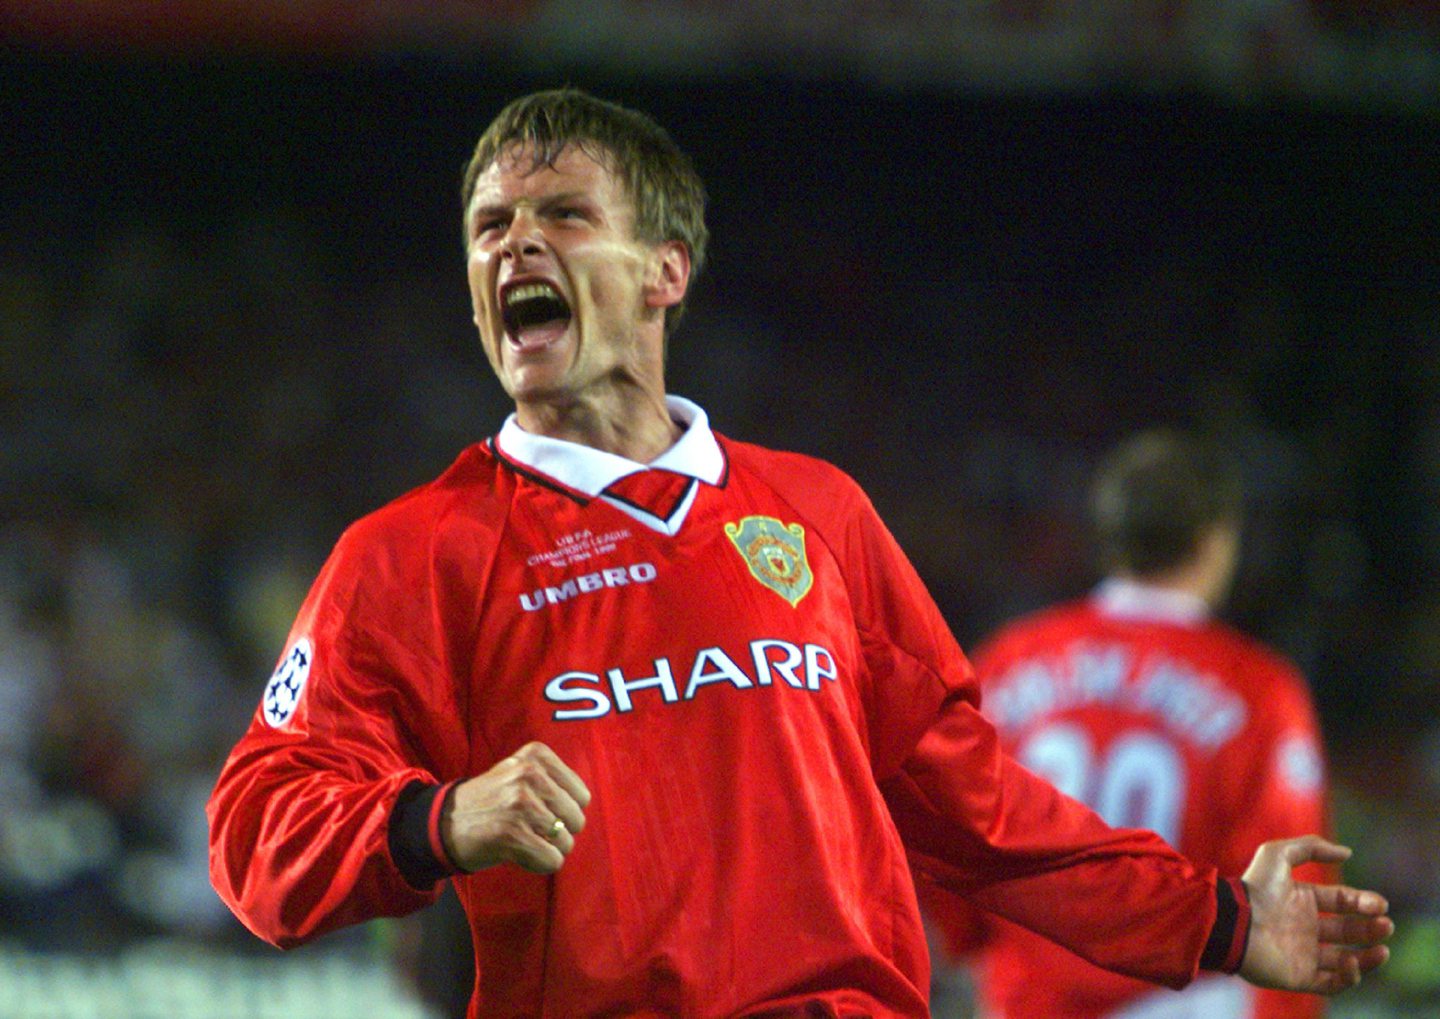 Teddy Sheringham celebrates scoring equaliser for Manchester United in Champions League Final win over Bayern Munich in 1999.